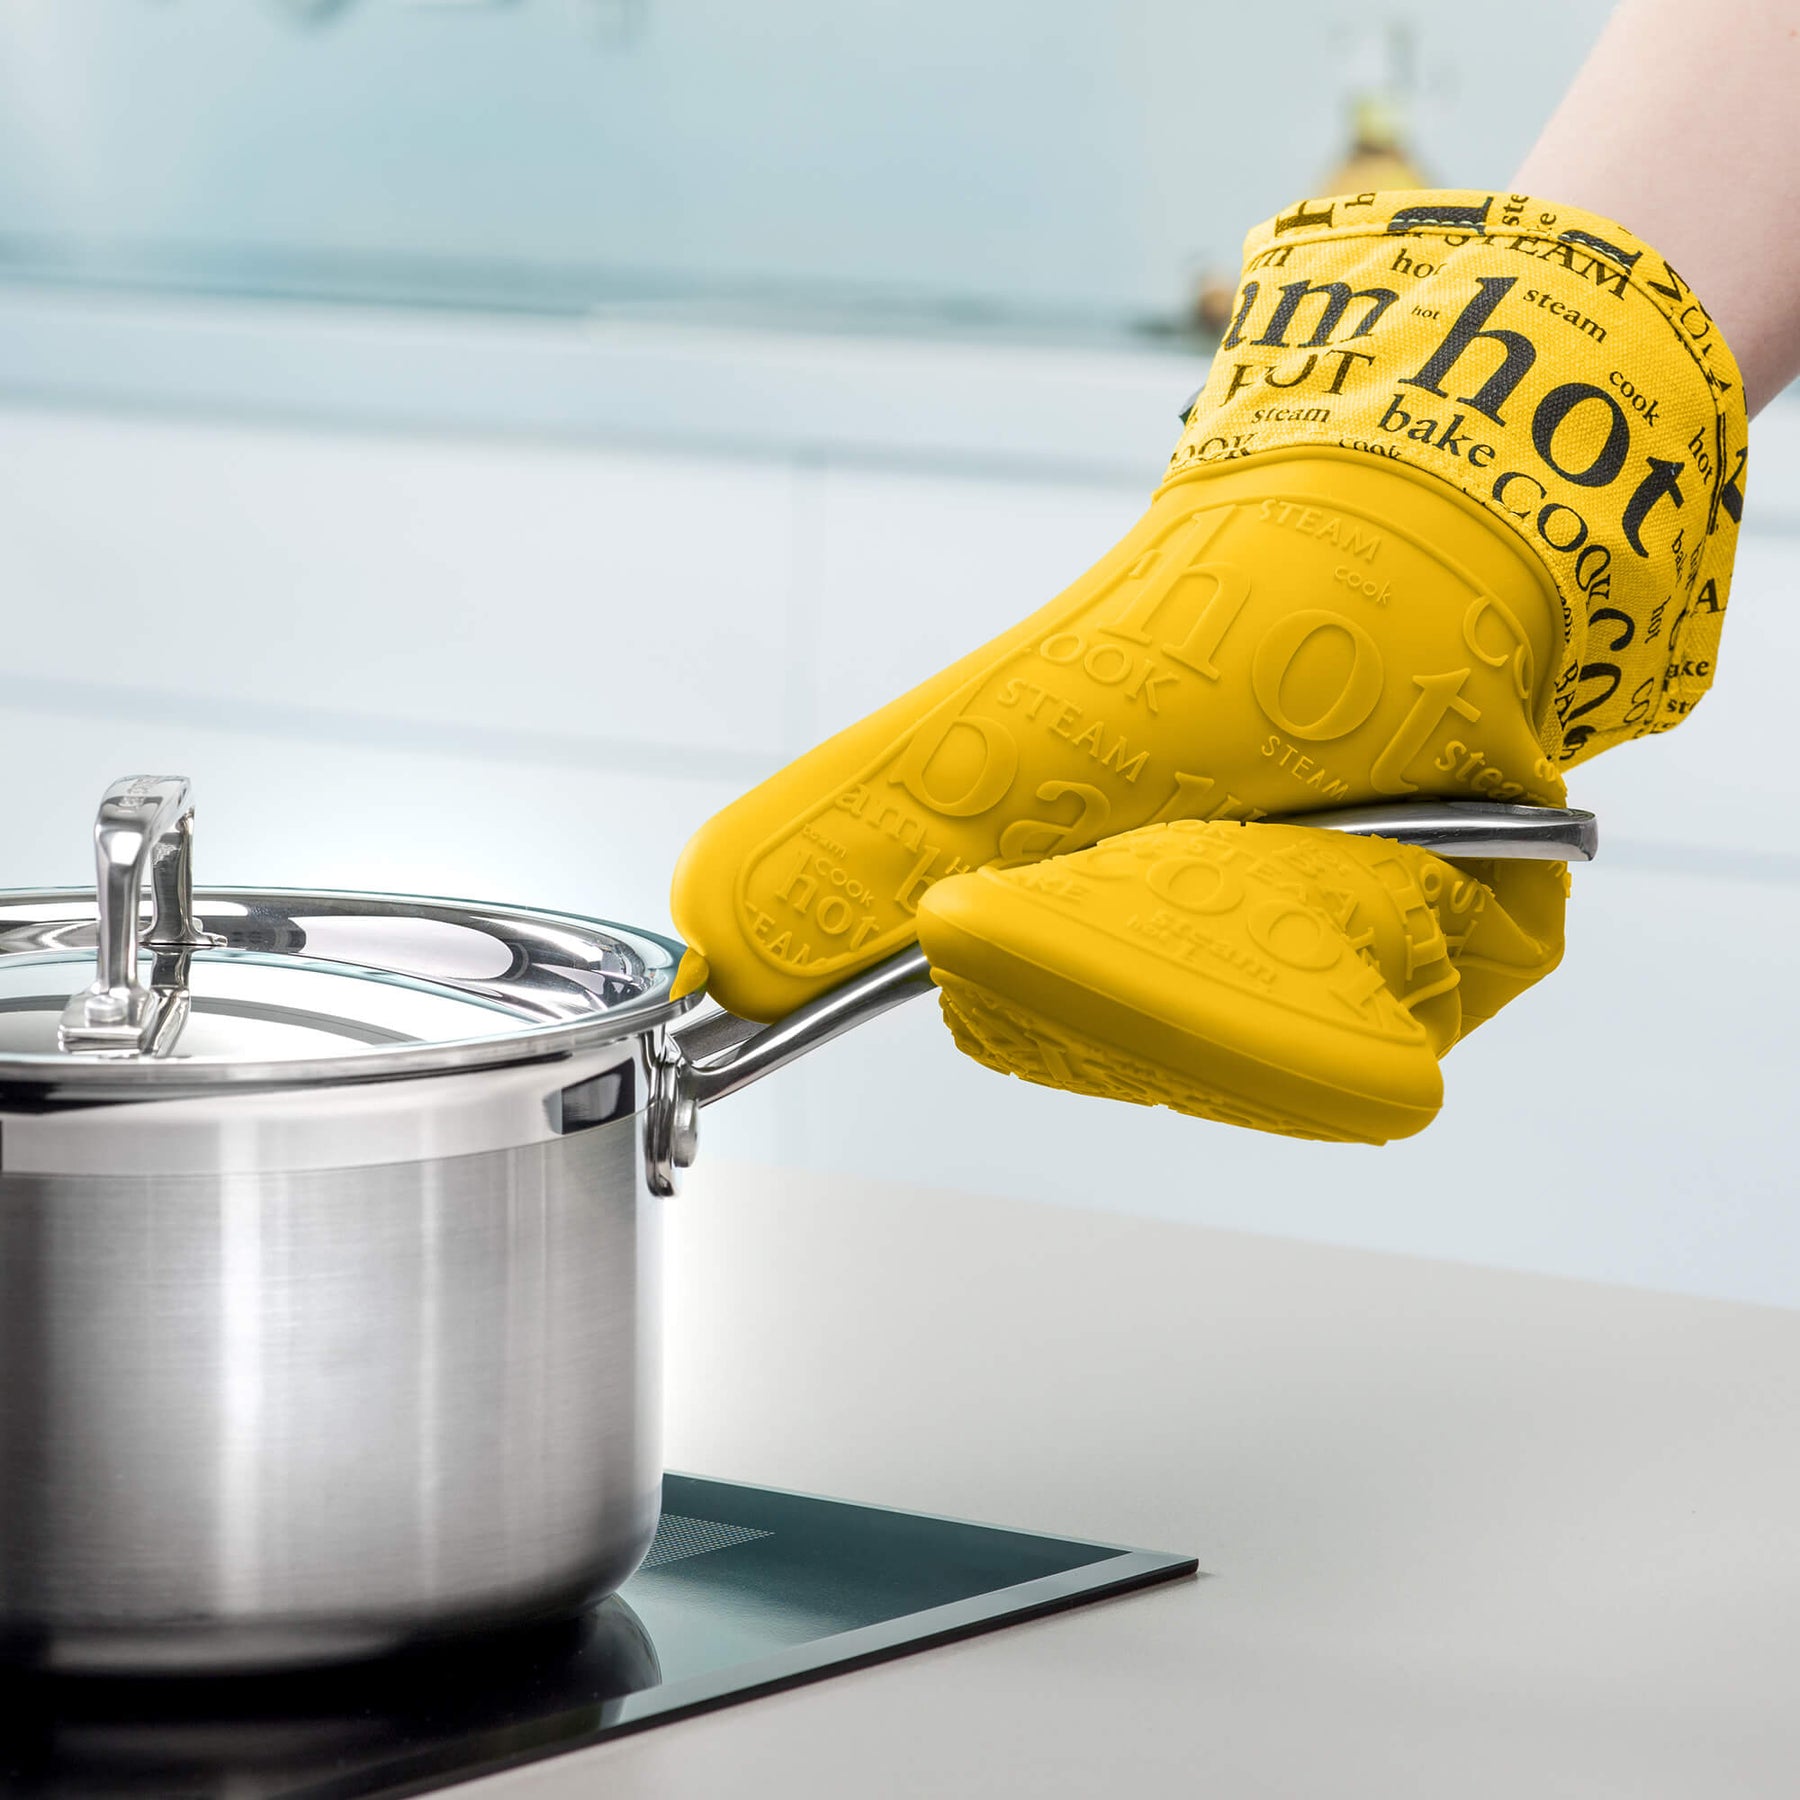 Steam Stop™ Waterproof Silicone Single Oven Glove